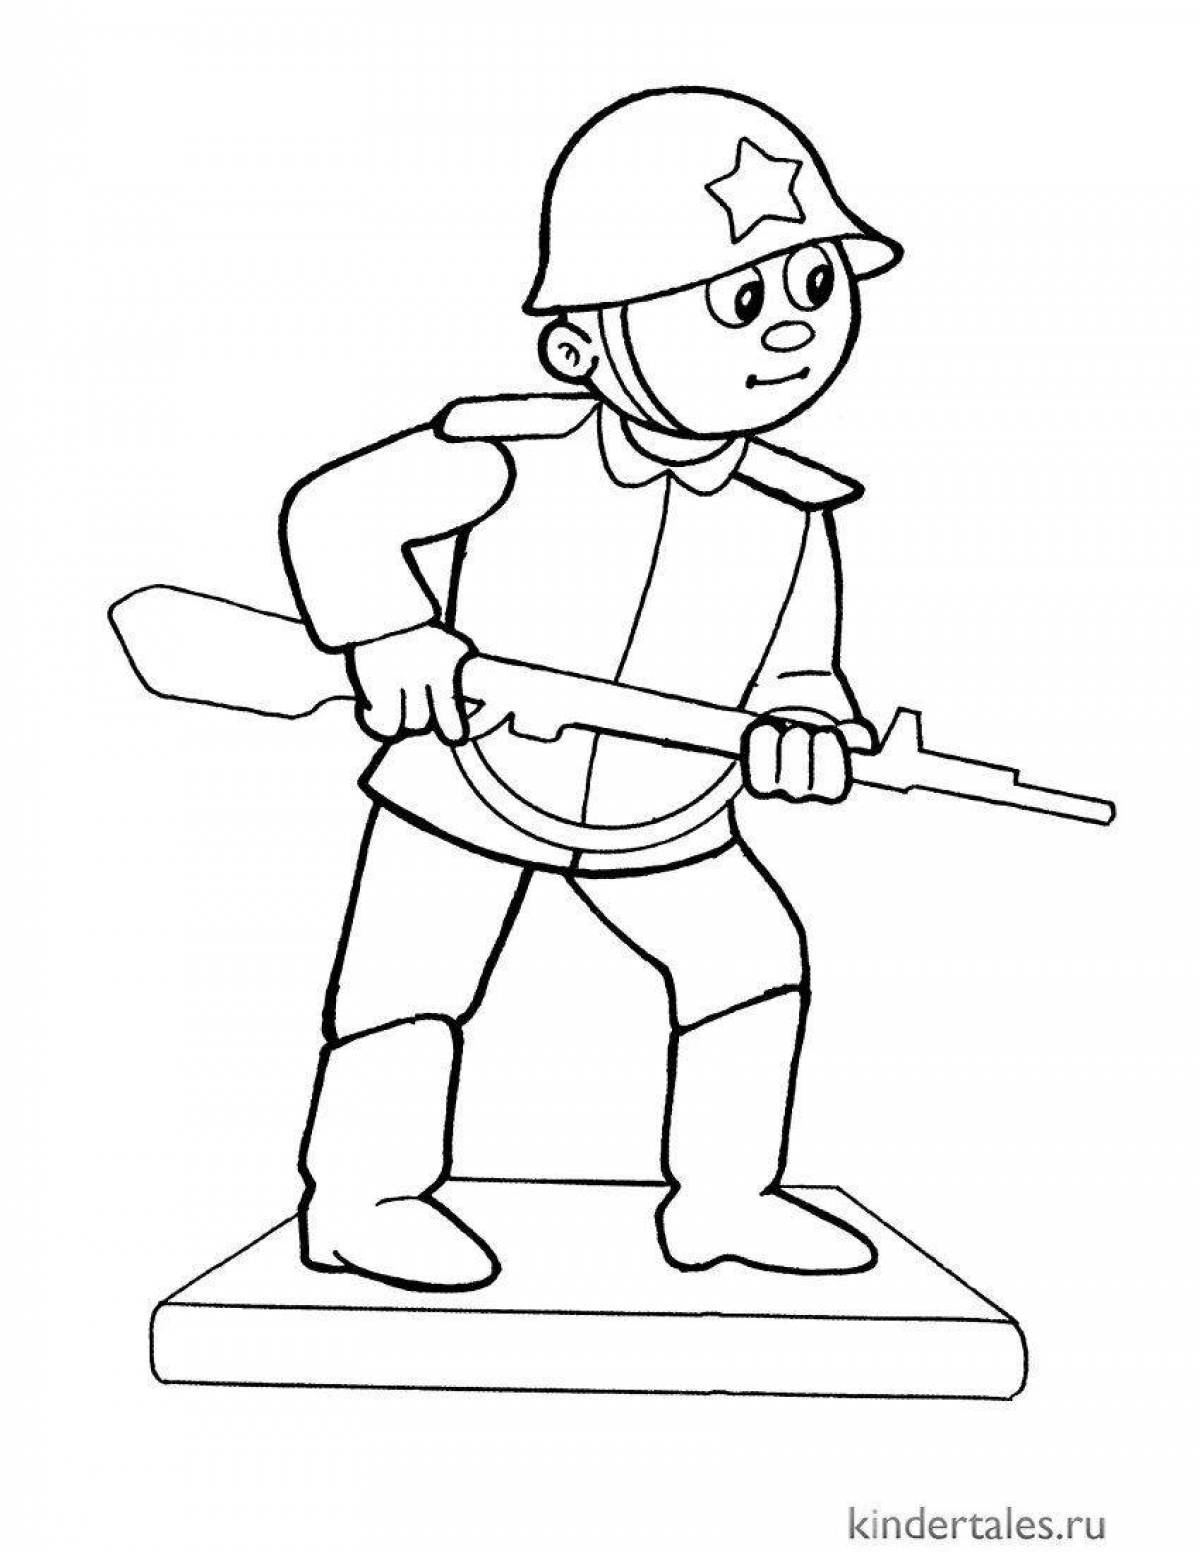 Live toy soldiers coloring pages for boys